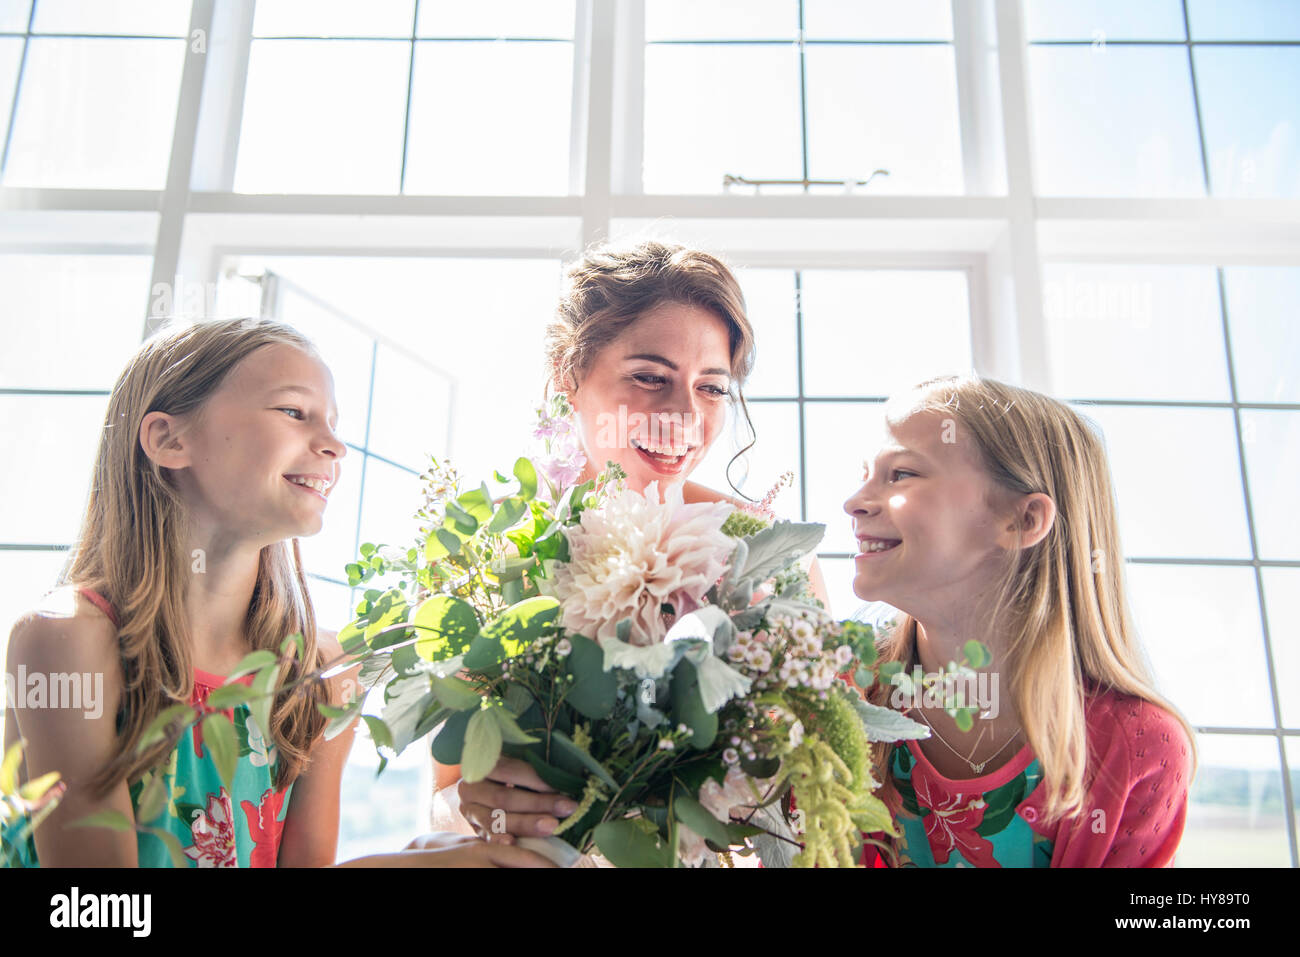 A bride with her twin bridesmaids holding a bouquet of flowers prior to her wedding Stock Photo